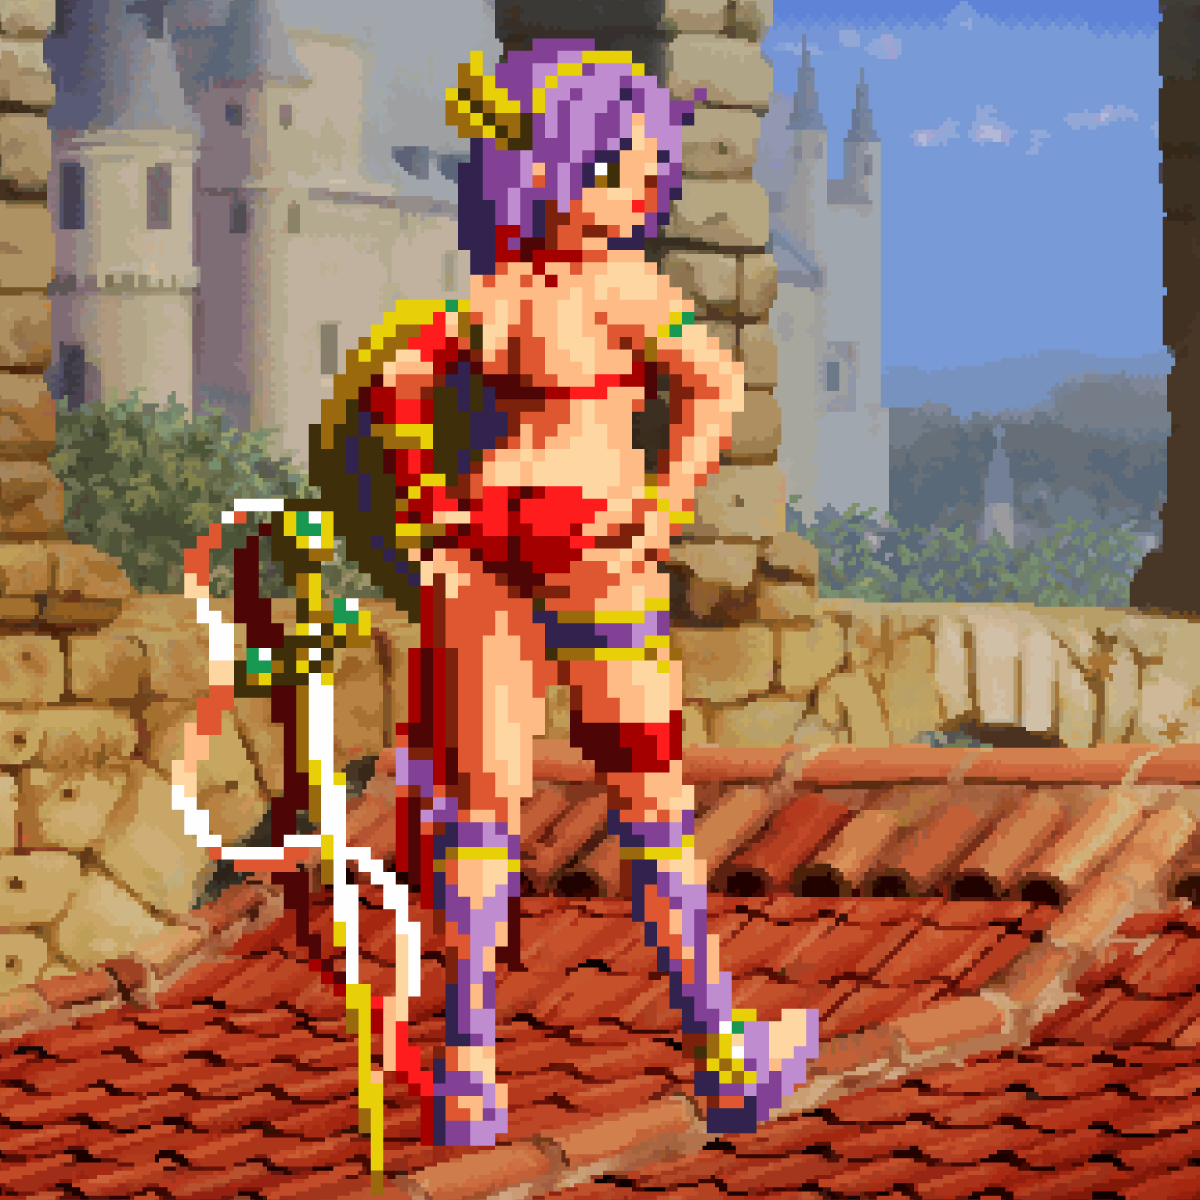 What Fantasy Land does Athena go to in her game by SNK